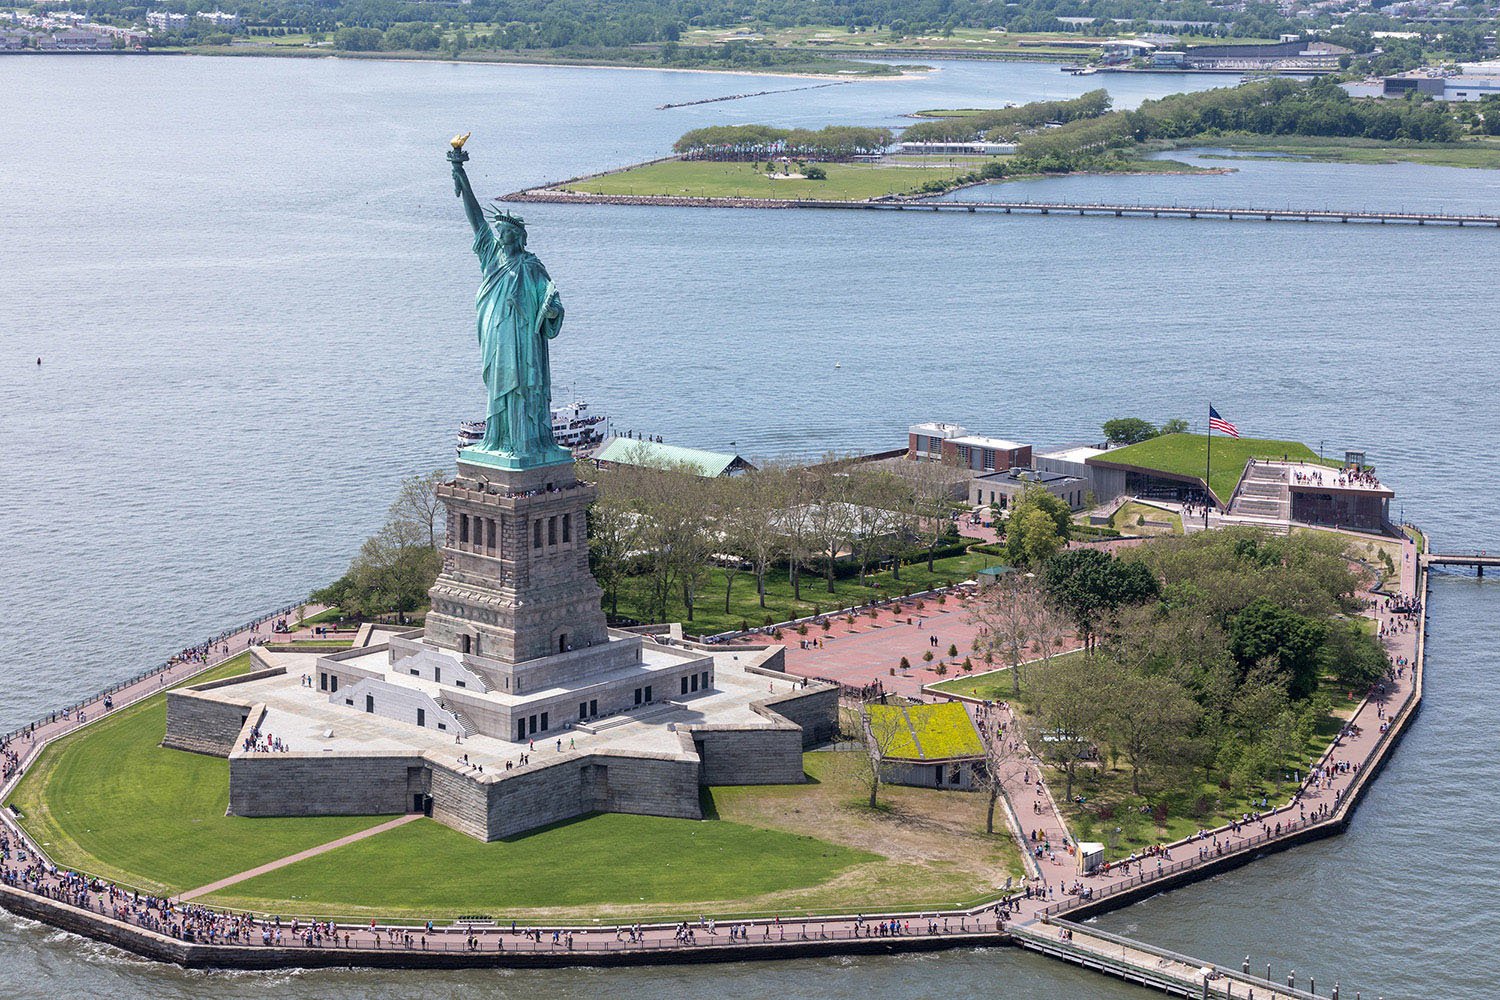 The museum and the Statue of Liberty—located on opposite ends of Liberty Island. | Copyright Iwan Baan